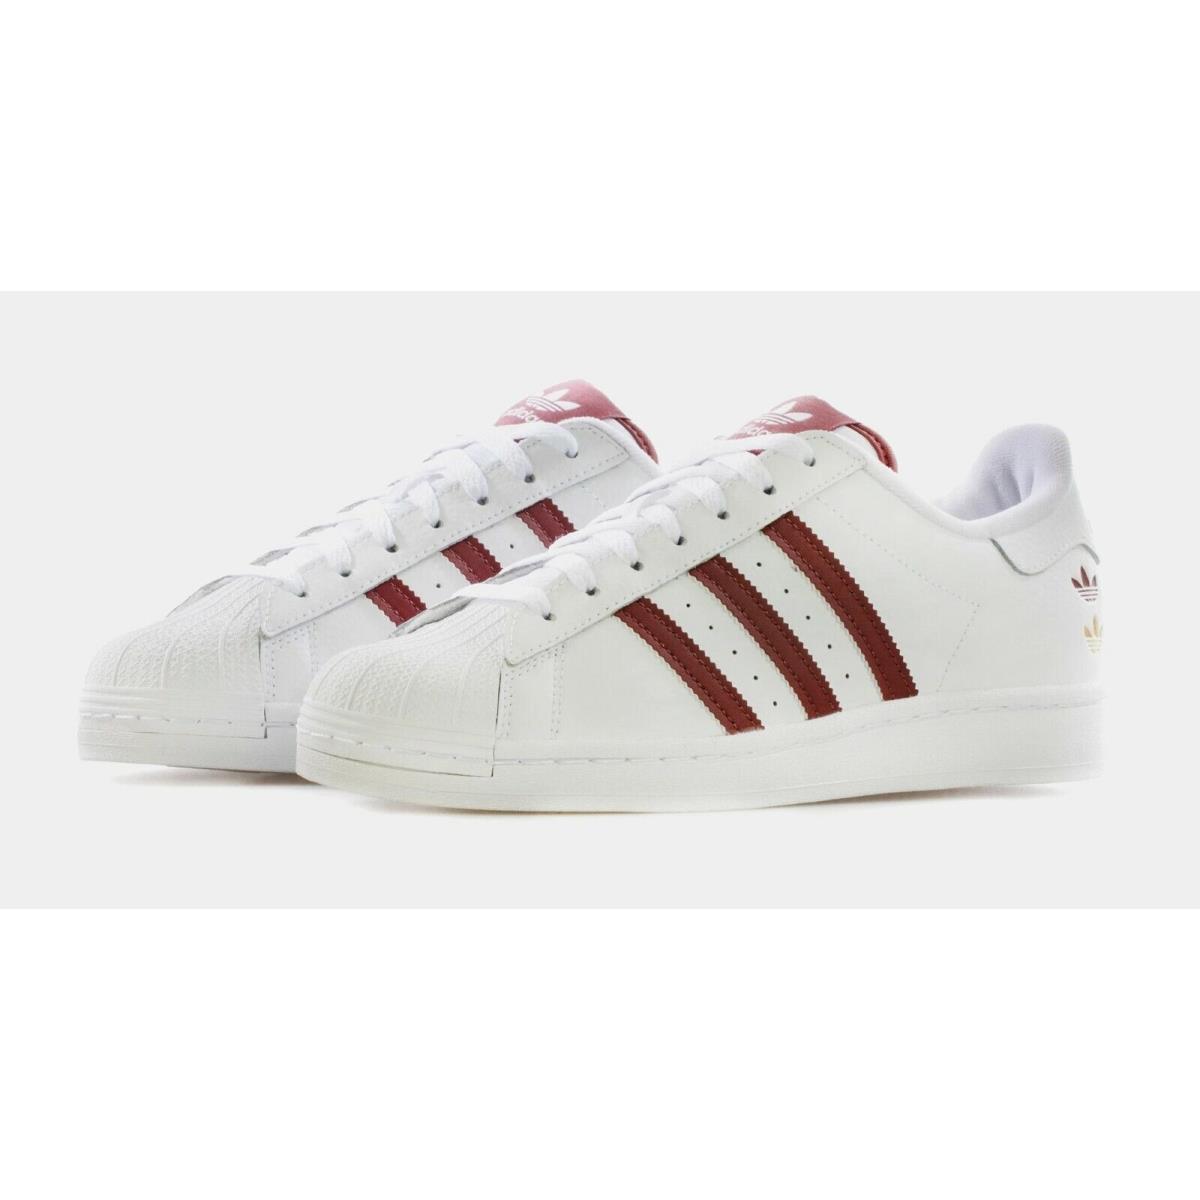 GY0976 Adidas Superstar Men`s Lifestyle Basketball Shoes 